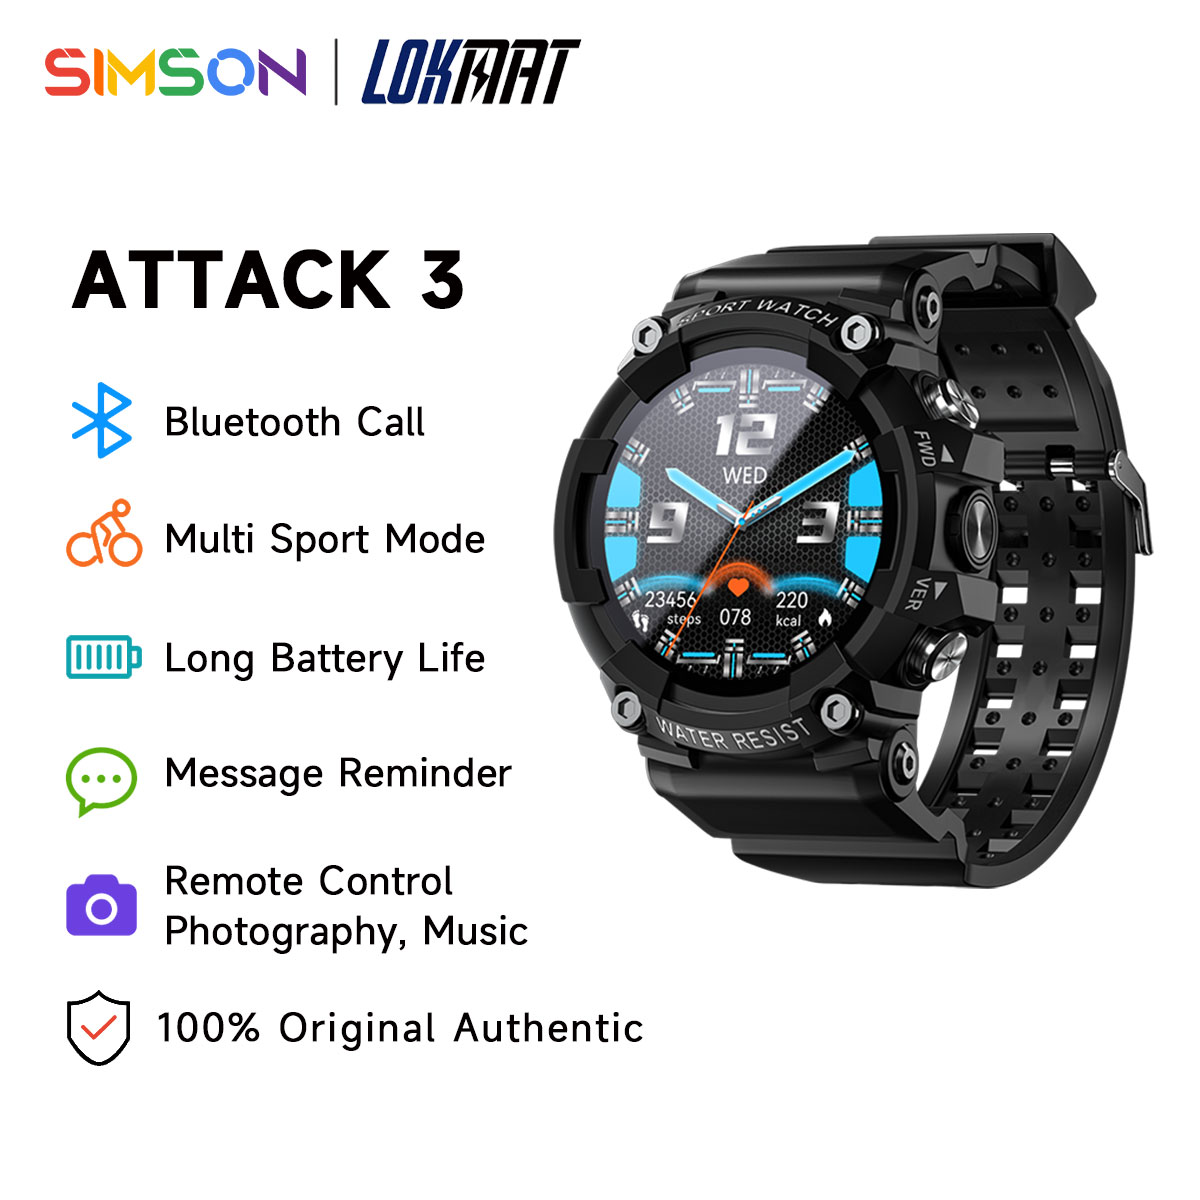 LOKMAT ATTACK 3 Sports Smartwatch Waterproof support Bluetooth Calling